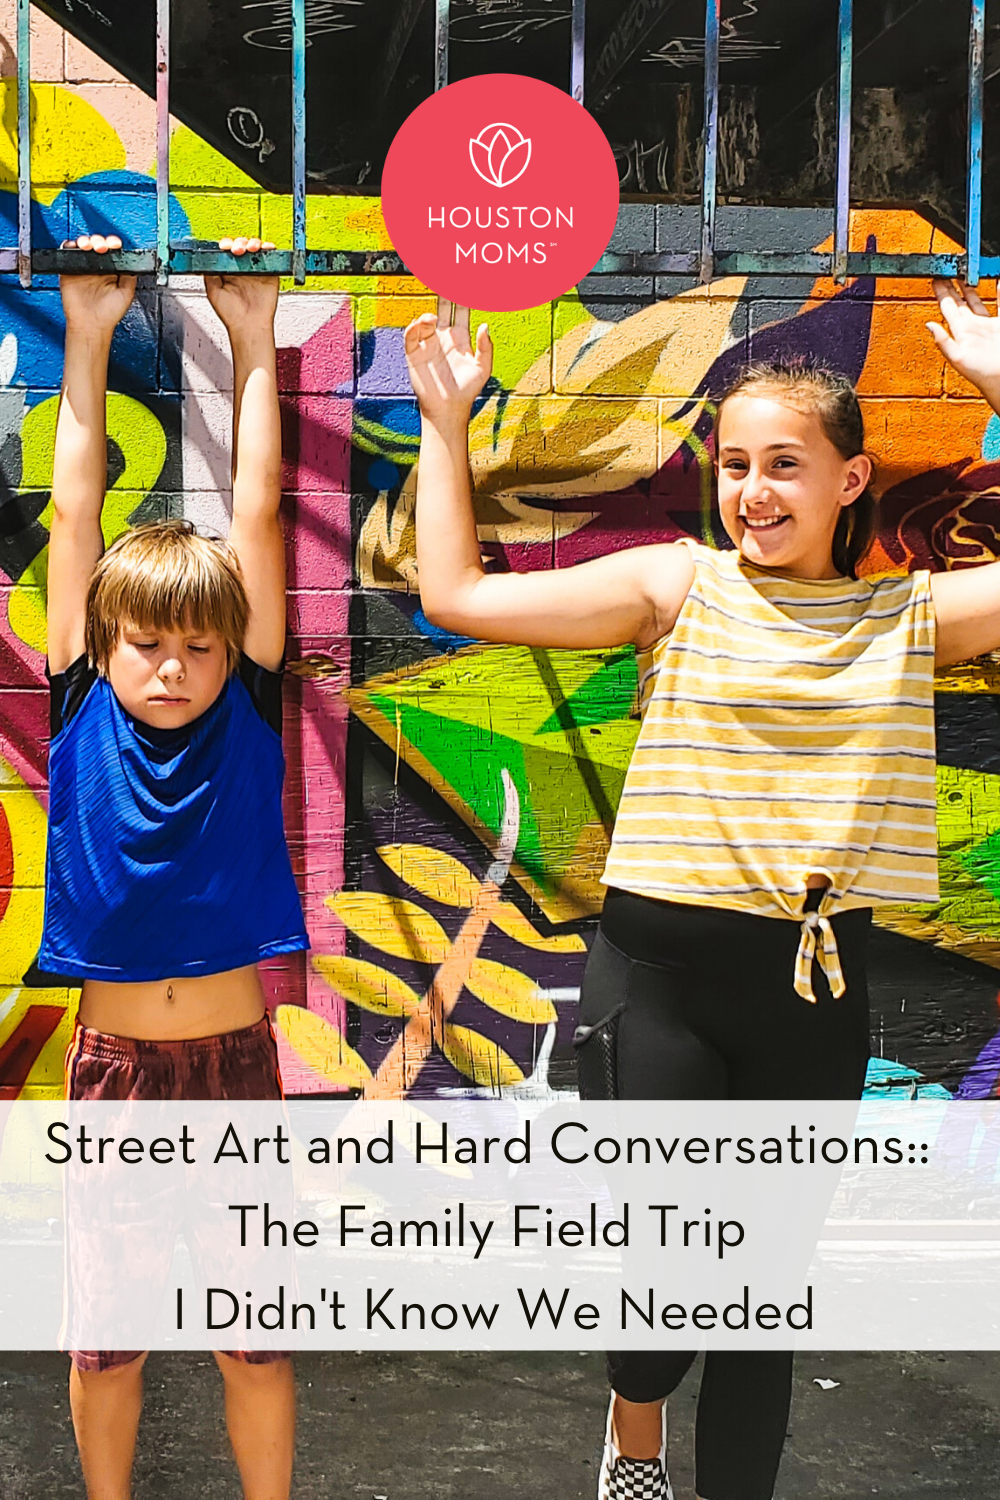 Houston Moms "Street Art and Hard Conversations:: The Family Field Trip I Didn't Know We Needed" #houstonmoms #houstonmomsblog #momsaroundhouston